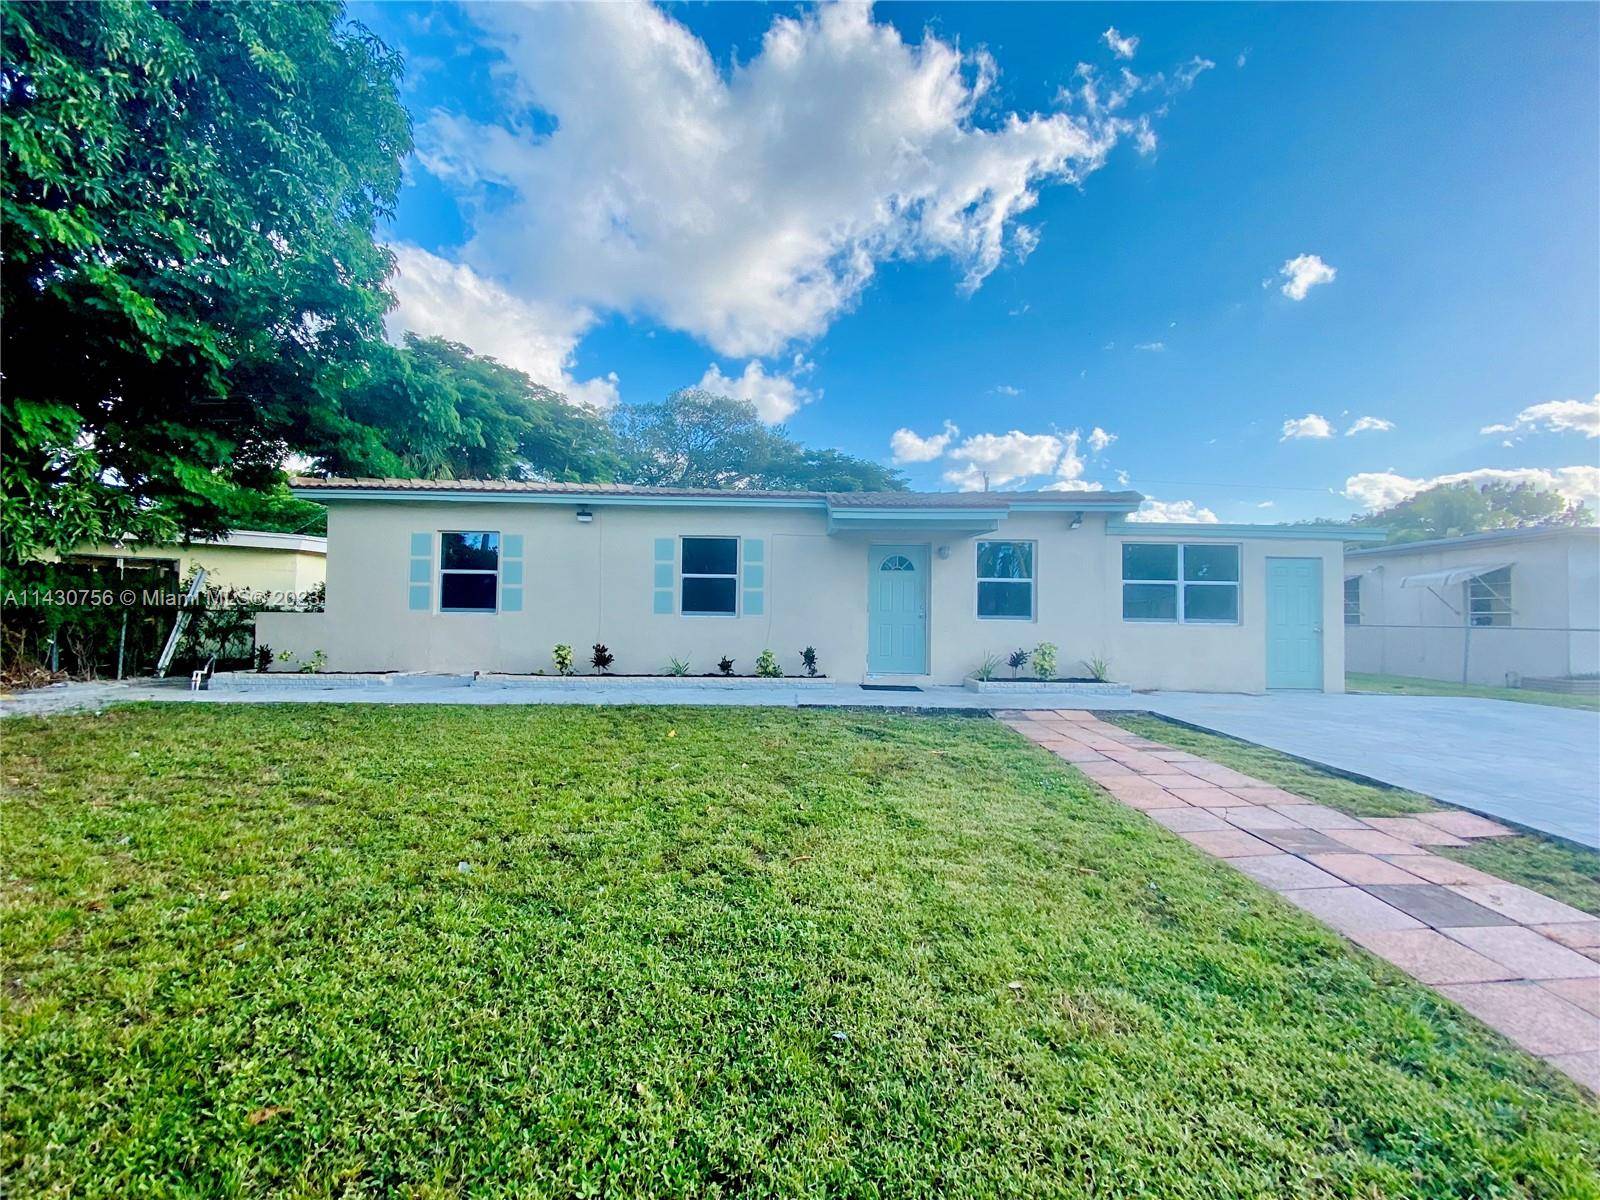 Beautiful single family home in the heart of Fort Lauderdale.